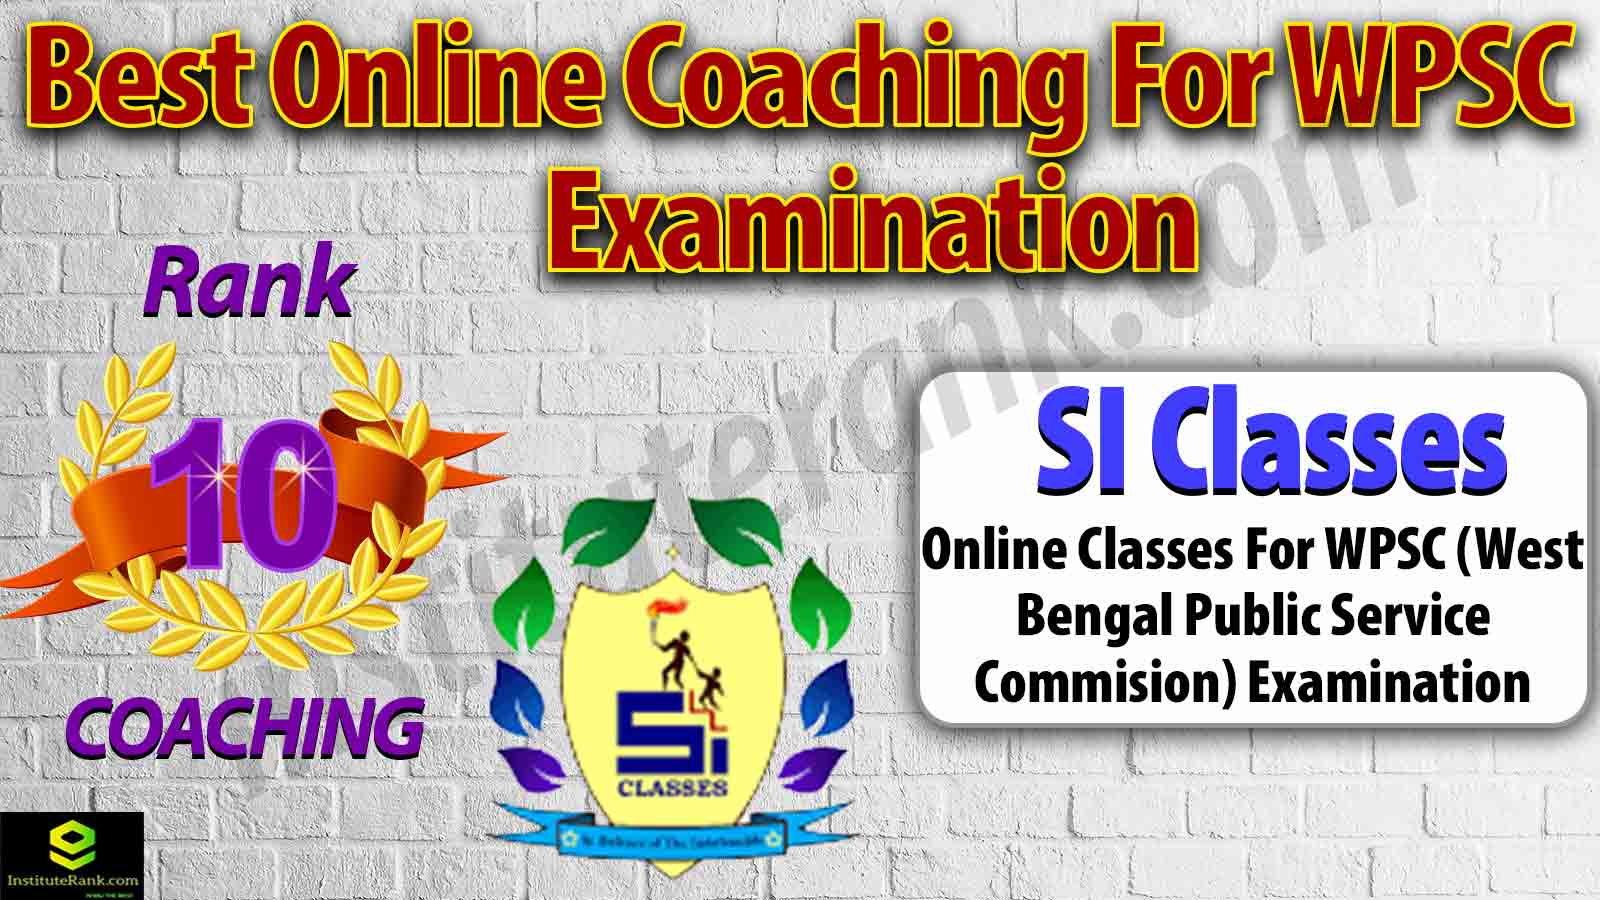 Top Online Coaching for WBPSC Preparation